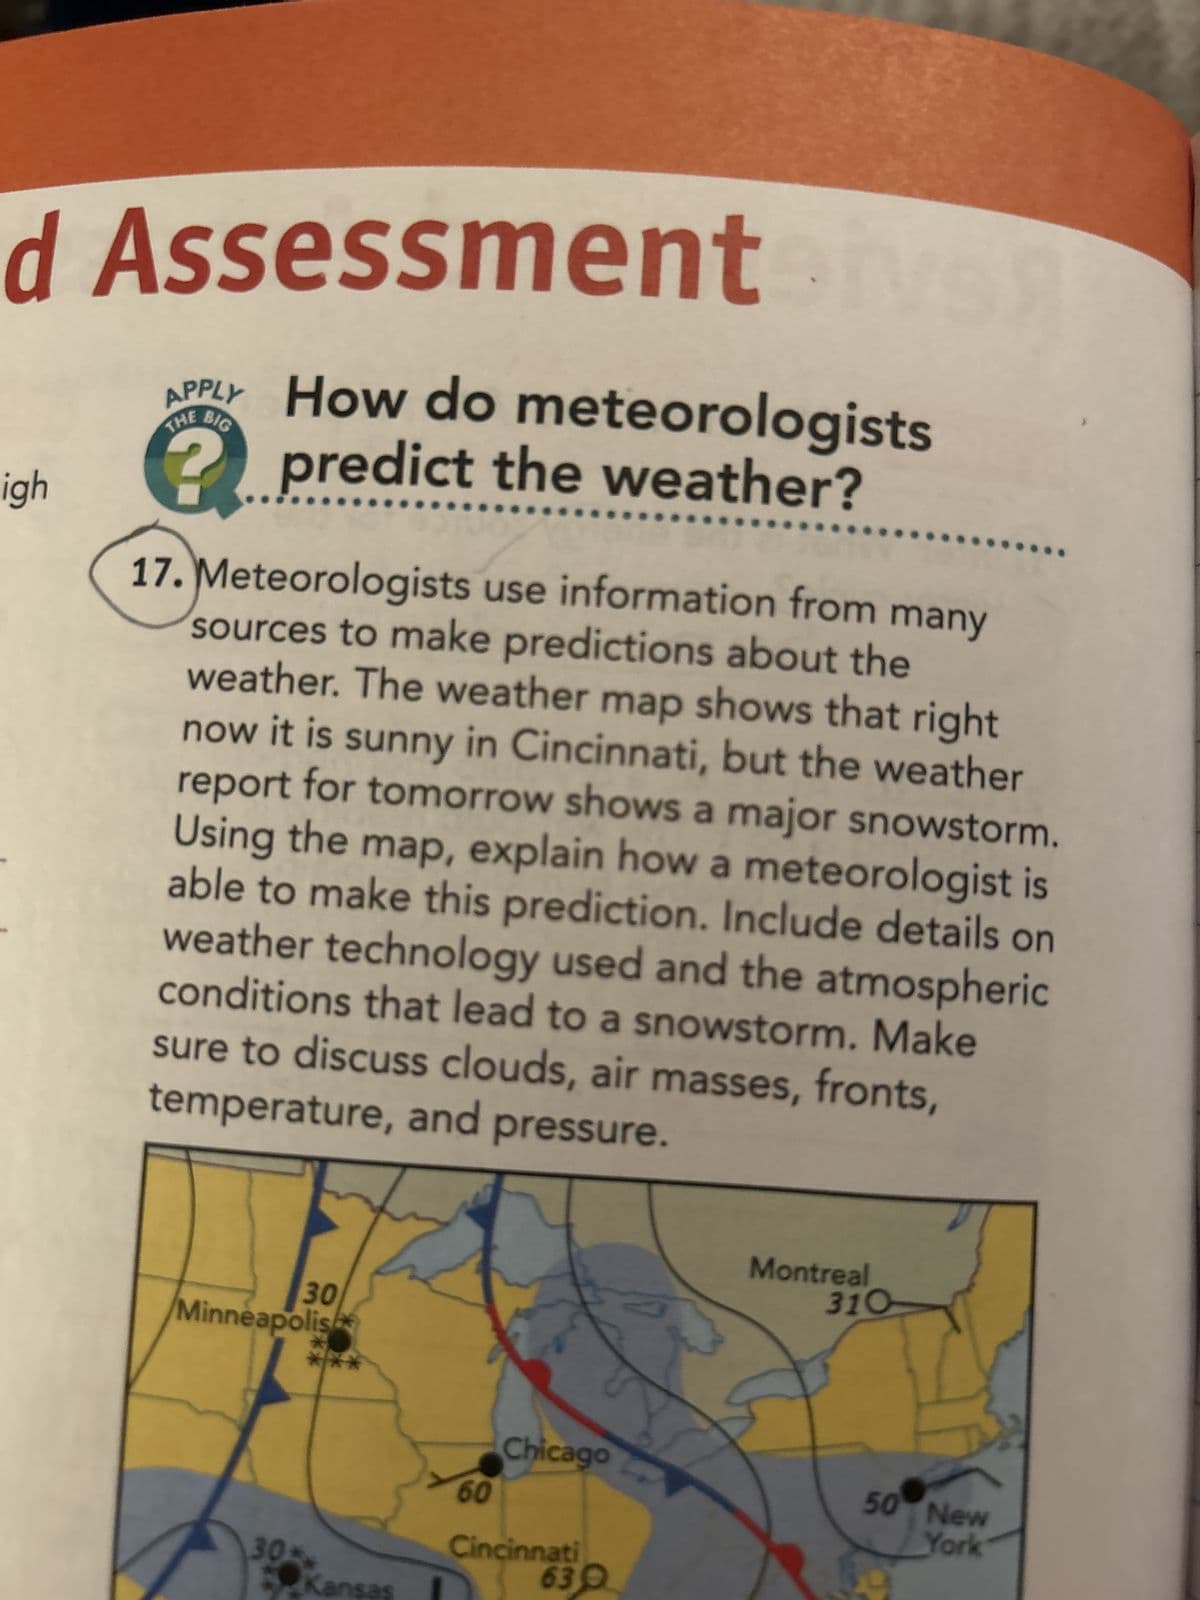 d Assessment ive
APPLY How do meteorologists
THE BIG
igh
?
predict the weather?
17. Meteorologists use information from many
sources to make predictions about the
weather. The weather map shows that right
now it is sunny in Cincinnati, but the weather
report for tomorrow shows a major snowstorm.
Using the map, explain how a meteorologist is
able to make this prediction. Include details on
weather technology used and the atmospheric
conditions that lead to a snowstorm. Make
sure to discuss clouds, air masses, fronts,
temperature, and pressure.
30
Minneapolis
30
s
Montreal
310
Chicago
50 New
60
Cincinnati
630
York